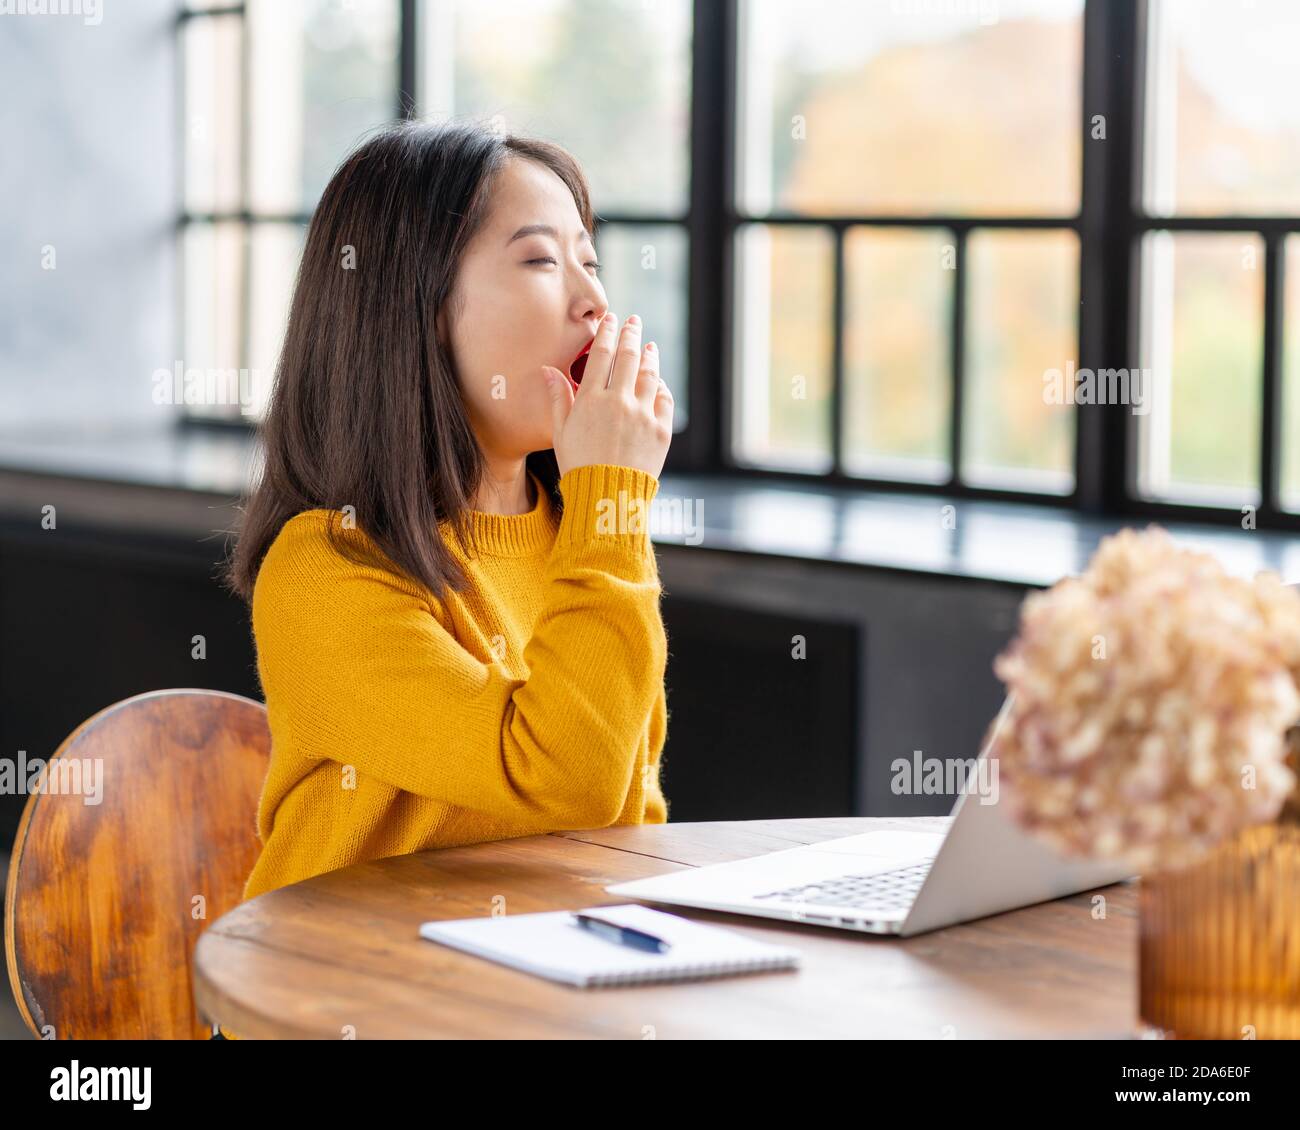 Asian woman yawning due to overworking and exhausting. Young lady in bright yellow jumper Stock Photo